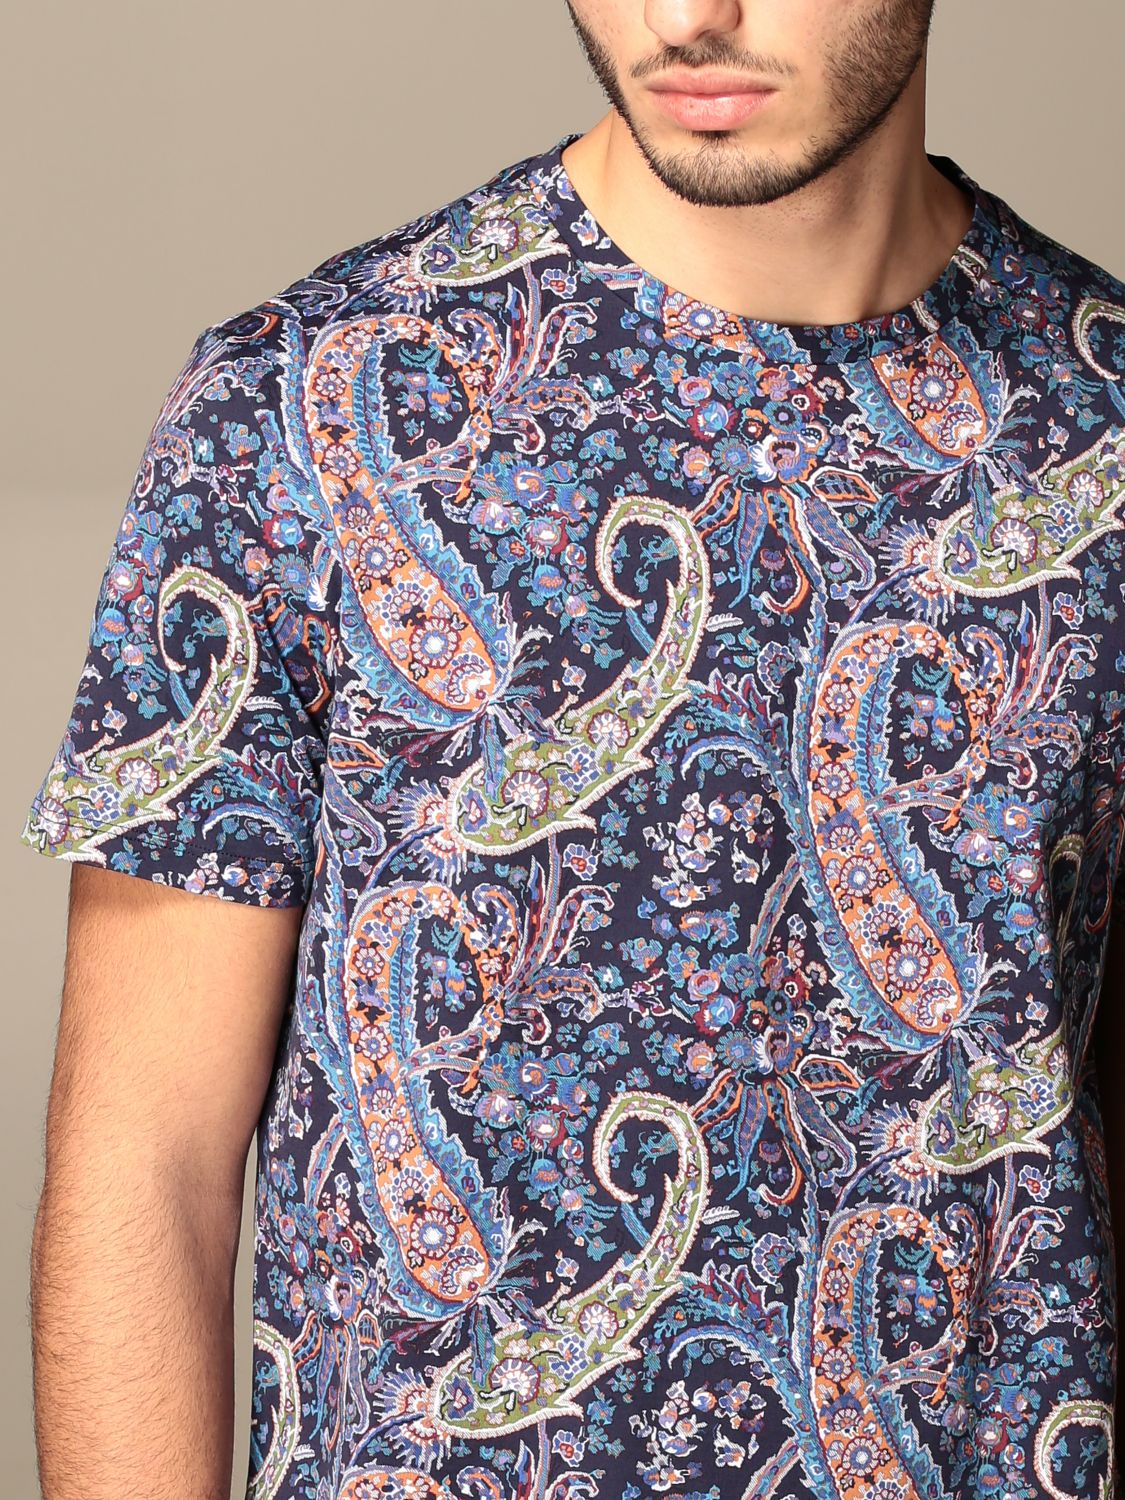 ETRO: t-shirt in paisley patterned cotton - Blue | Etro t-shirt 1Y020 ...